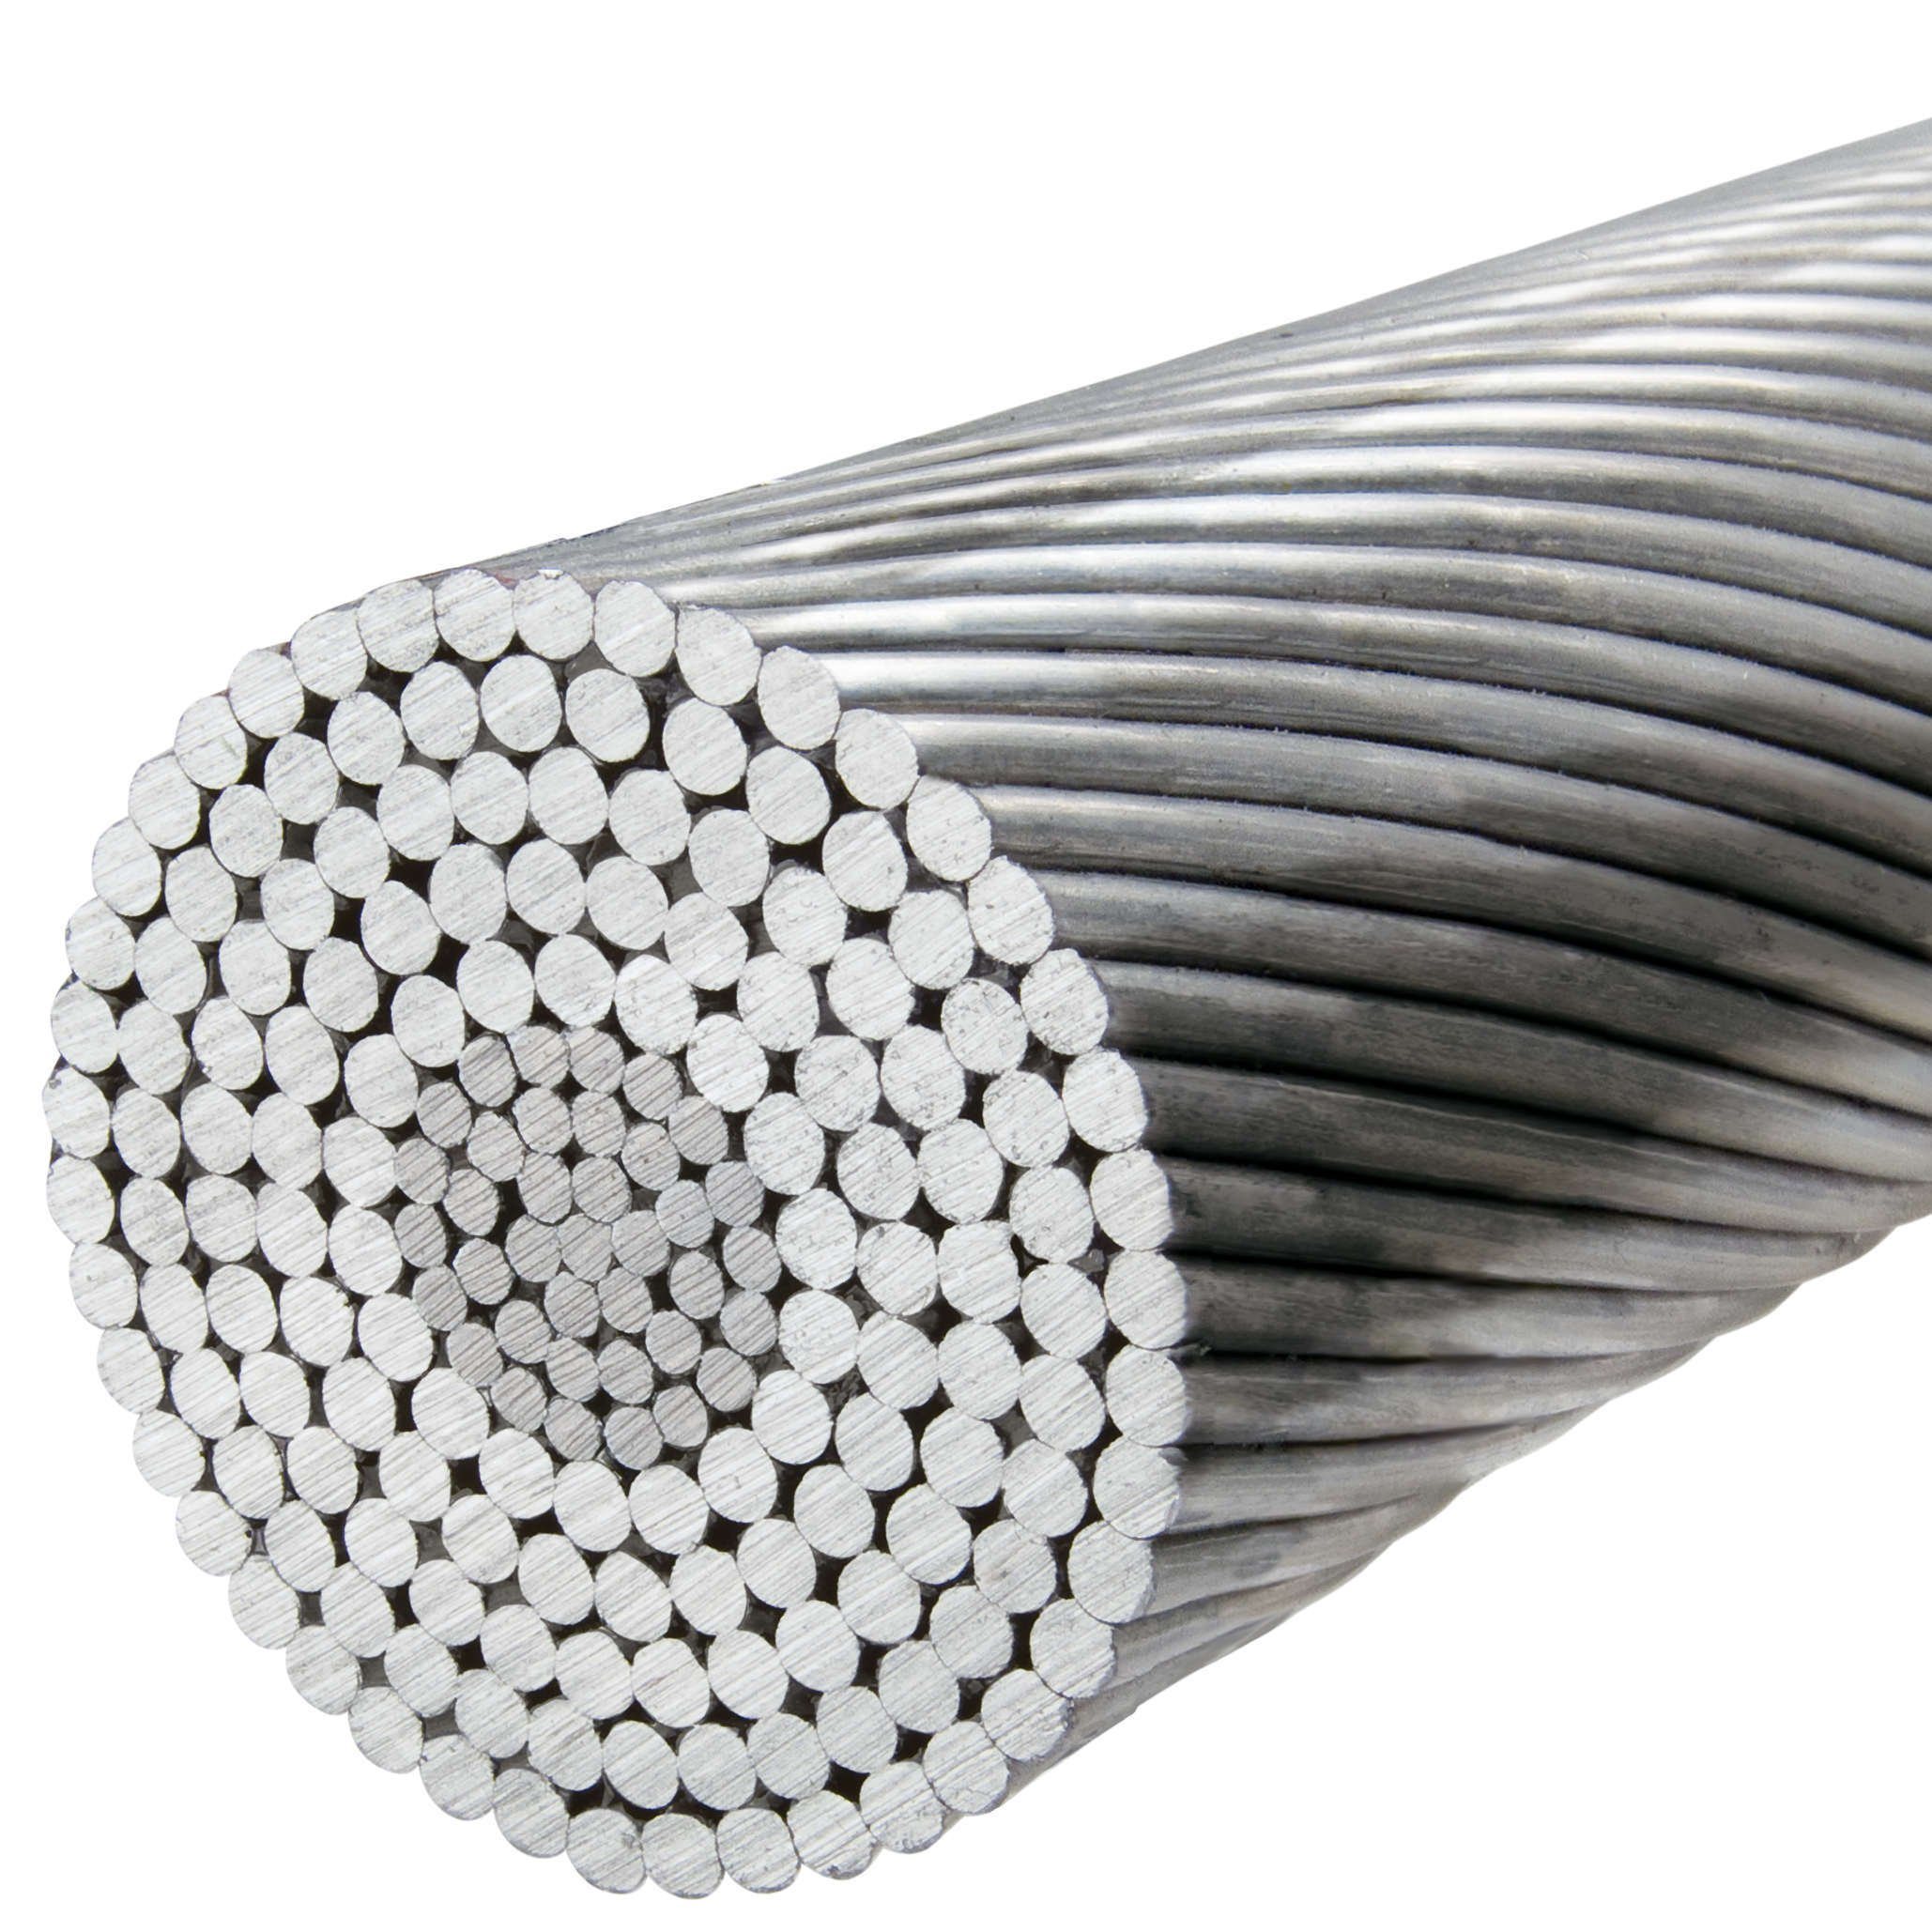 ACSR Conductor Aluminum Conductor Steel Reinforced Bare Conductor